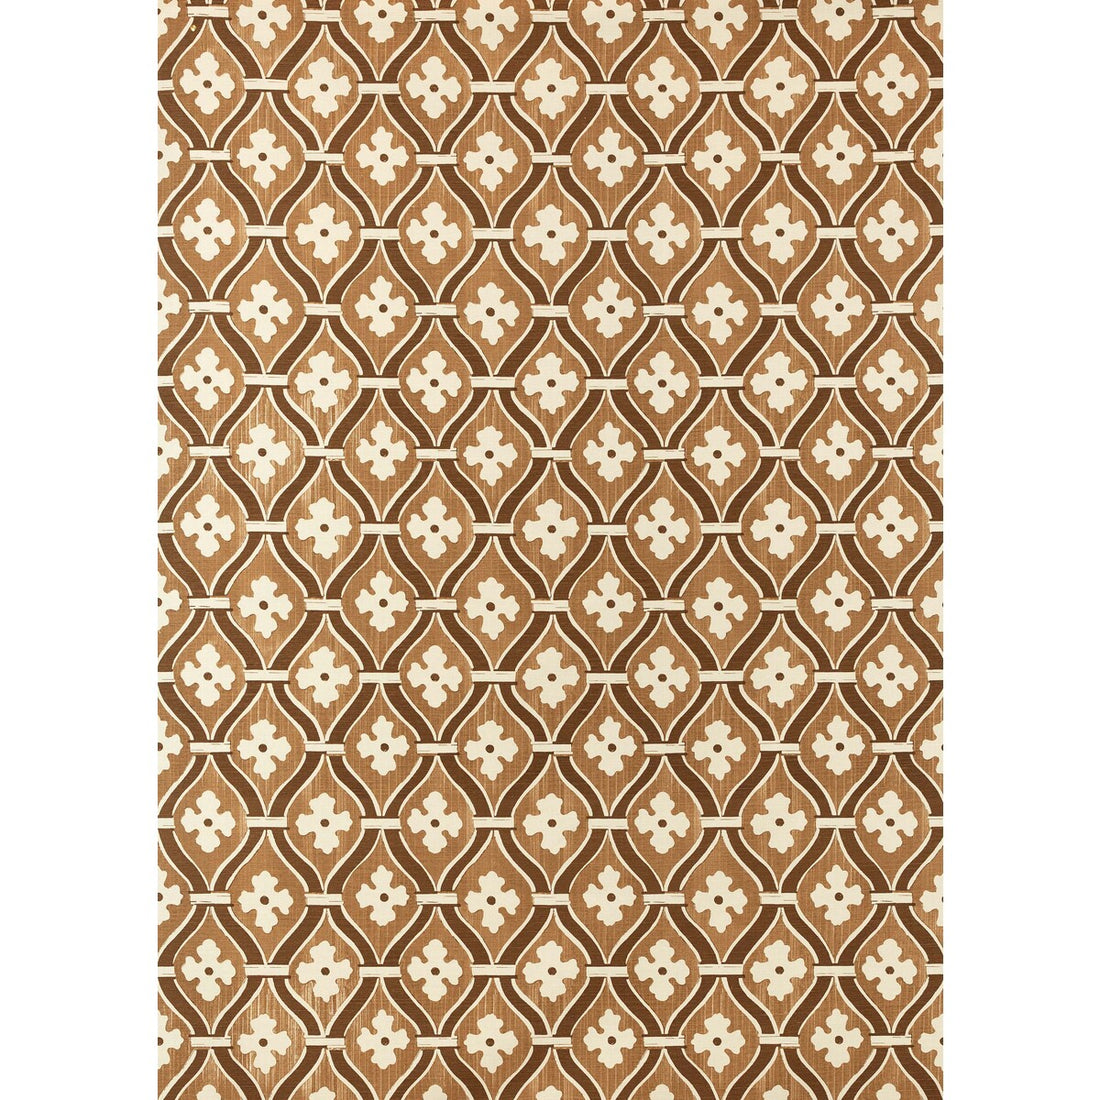 Byblos fabric in brown color - pattern 2022121.6.0 - by Lee Jofa in the Paolo Moschino Persepolis collection